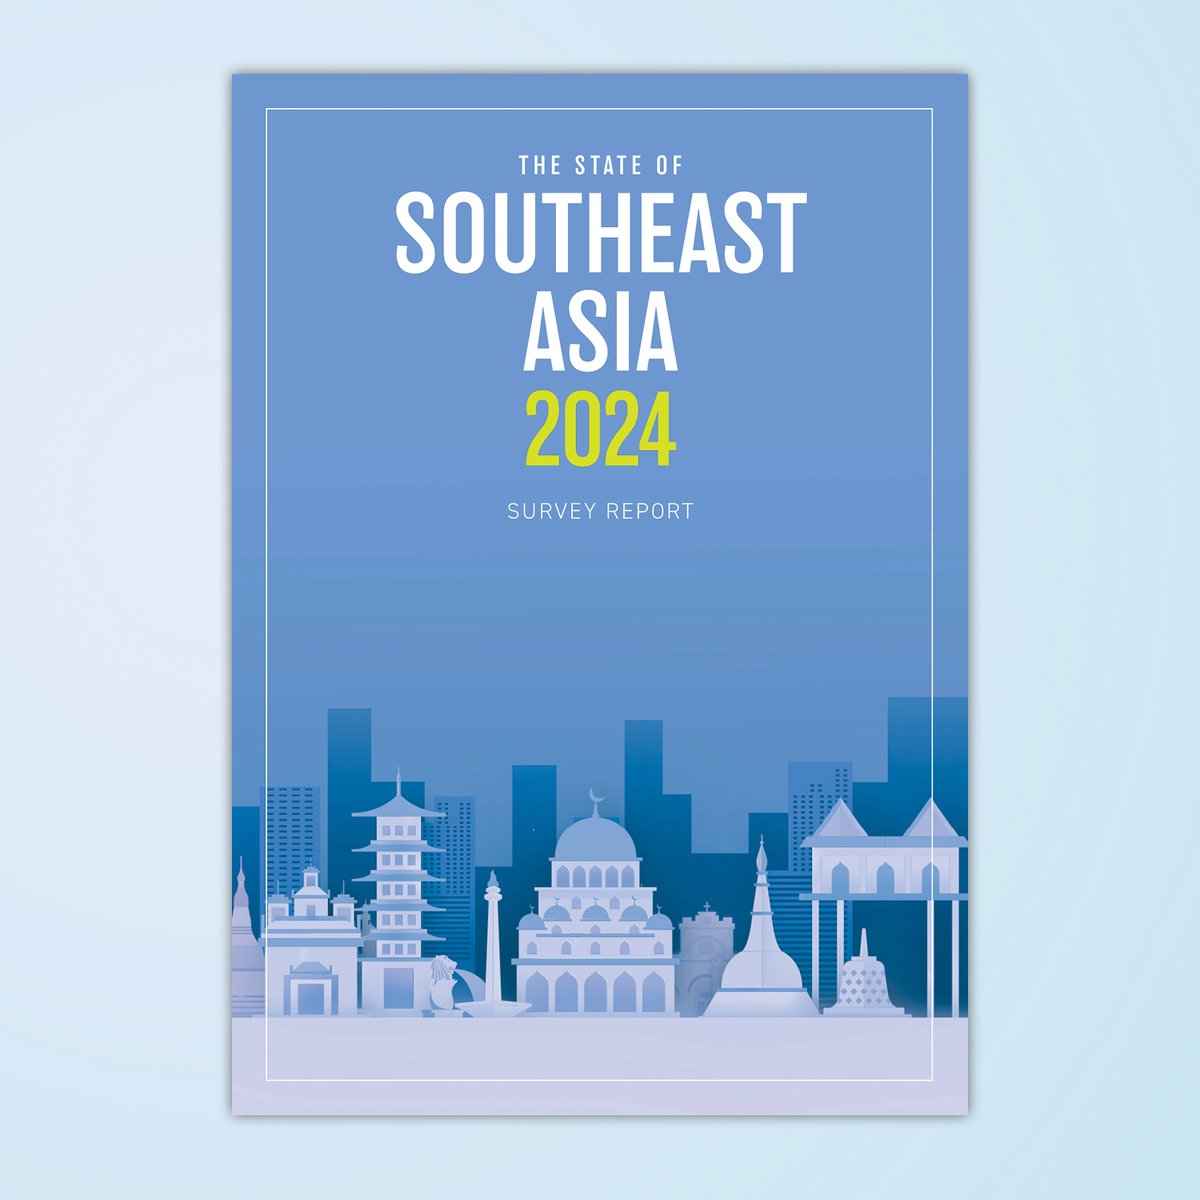 The State of Southeast Asia 2024 Survey Report is officially launched! #SSEA2024 gauges the views and perceptions of Southeast Asians on geopolitical developments affecting the region. Download the issue here: iseas.edu.sg/category/centr… #SSEA #ASEAN